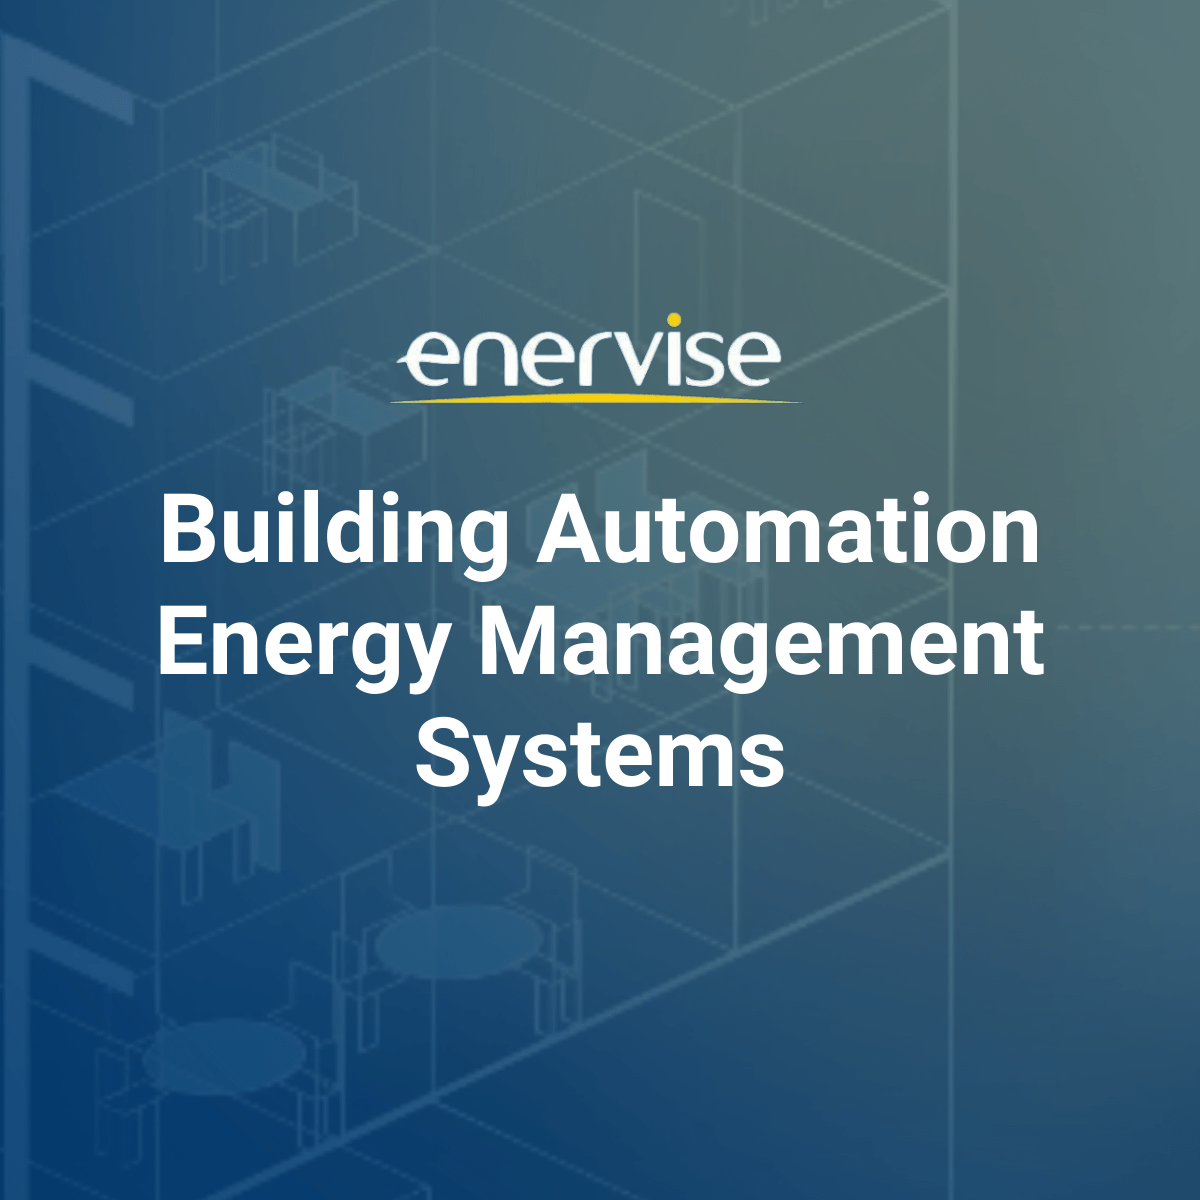 The Impact of Building Automation Energy Management Systems